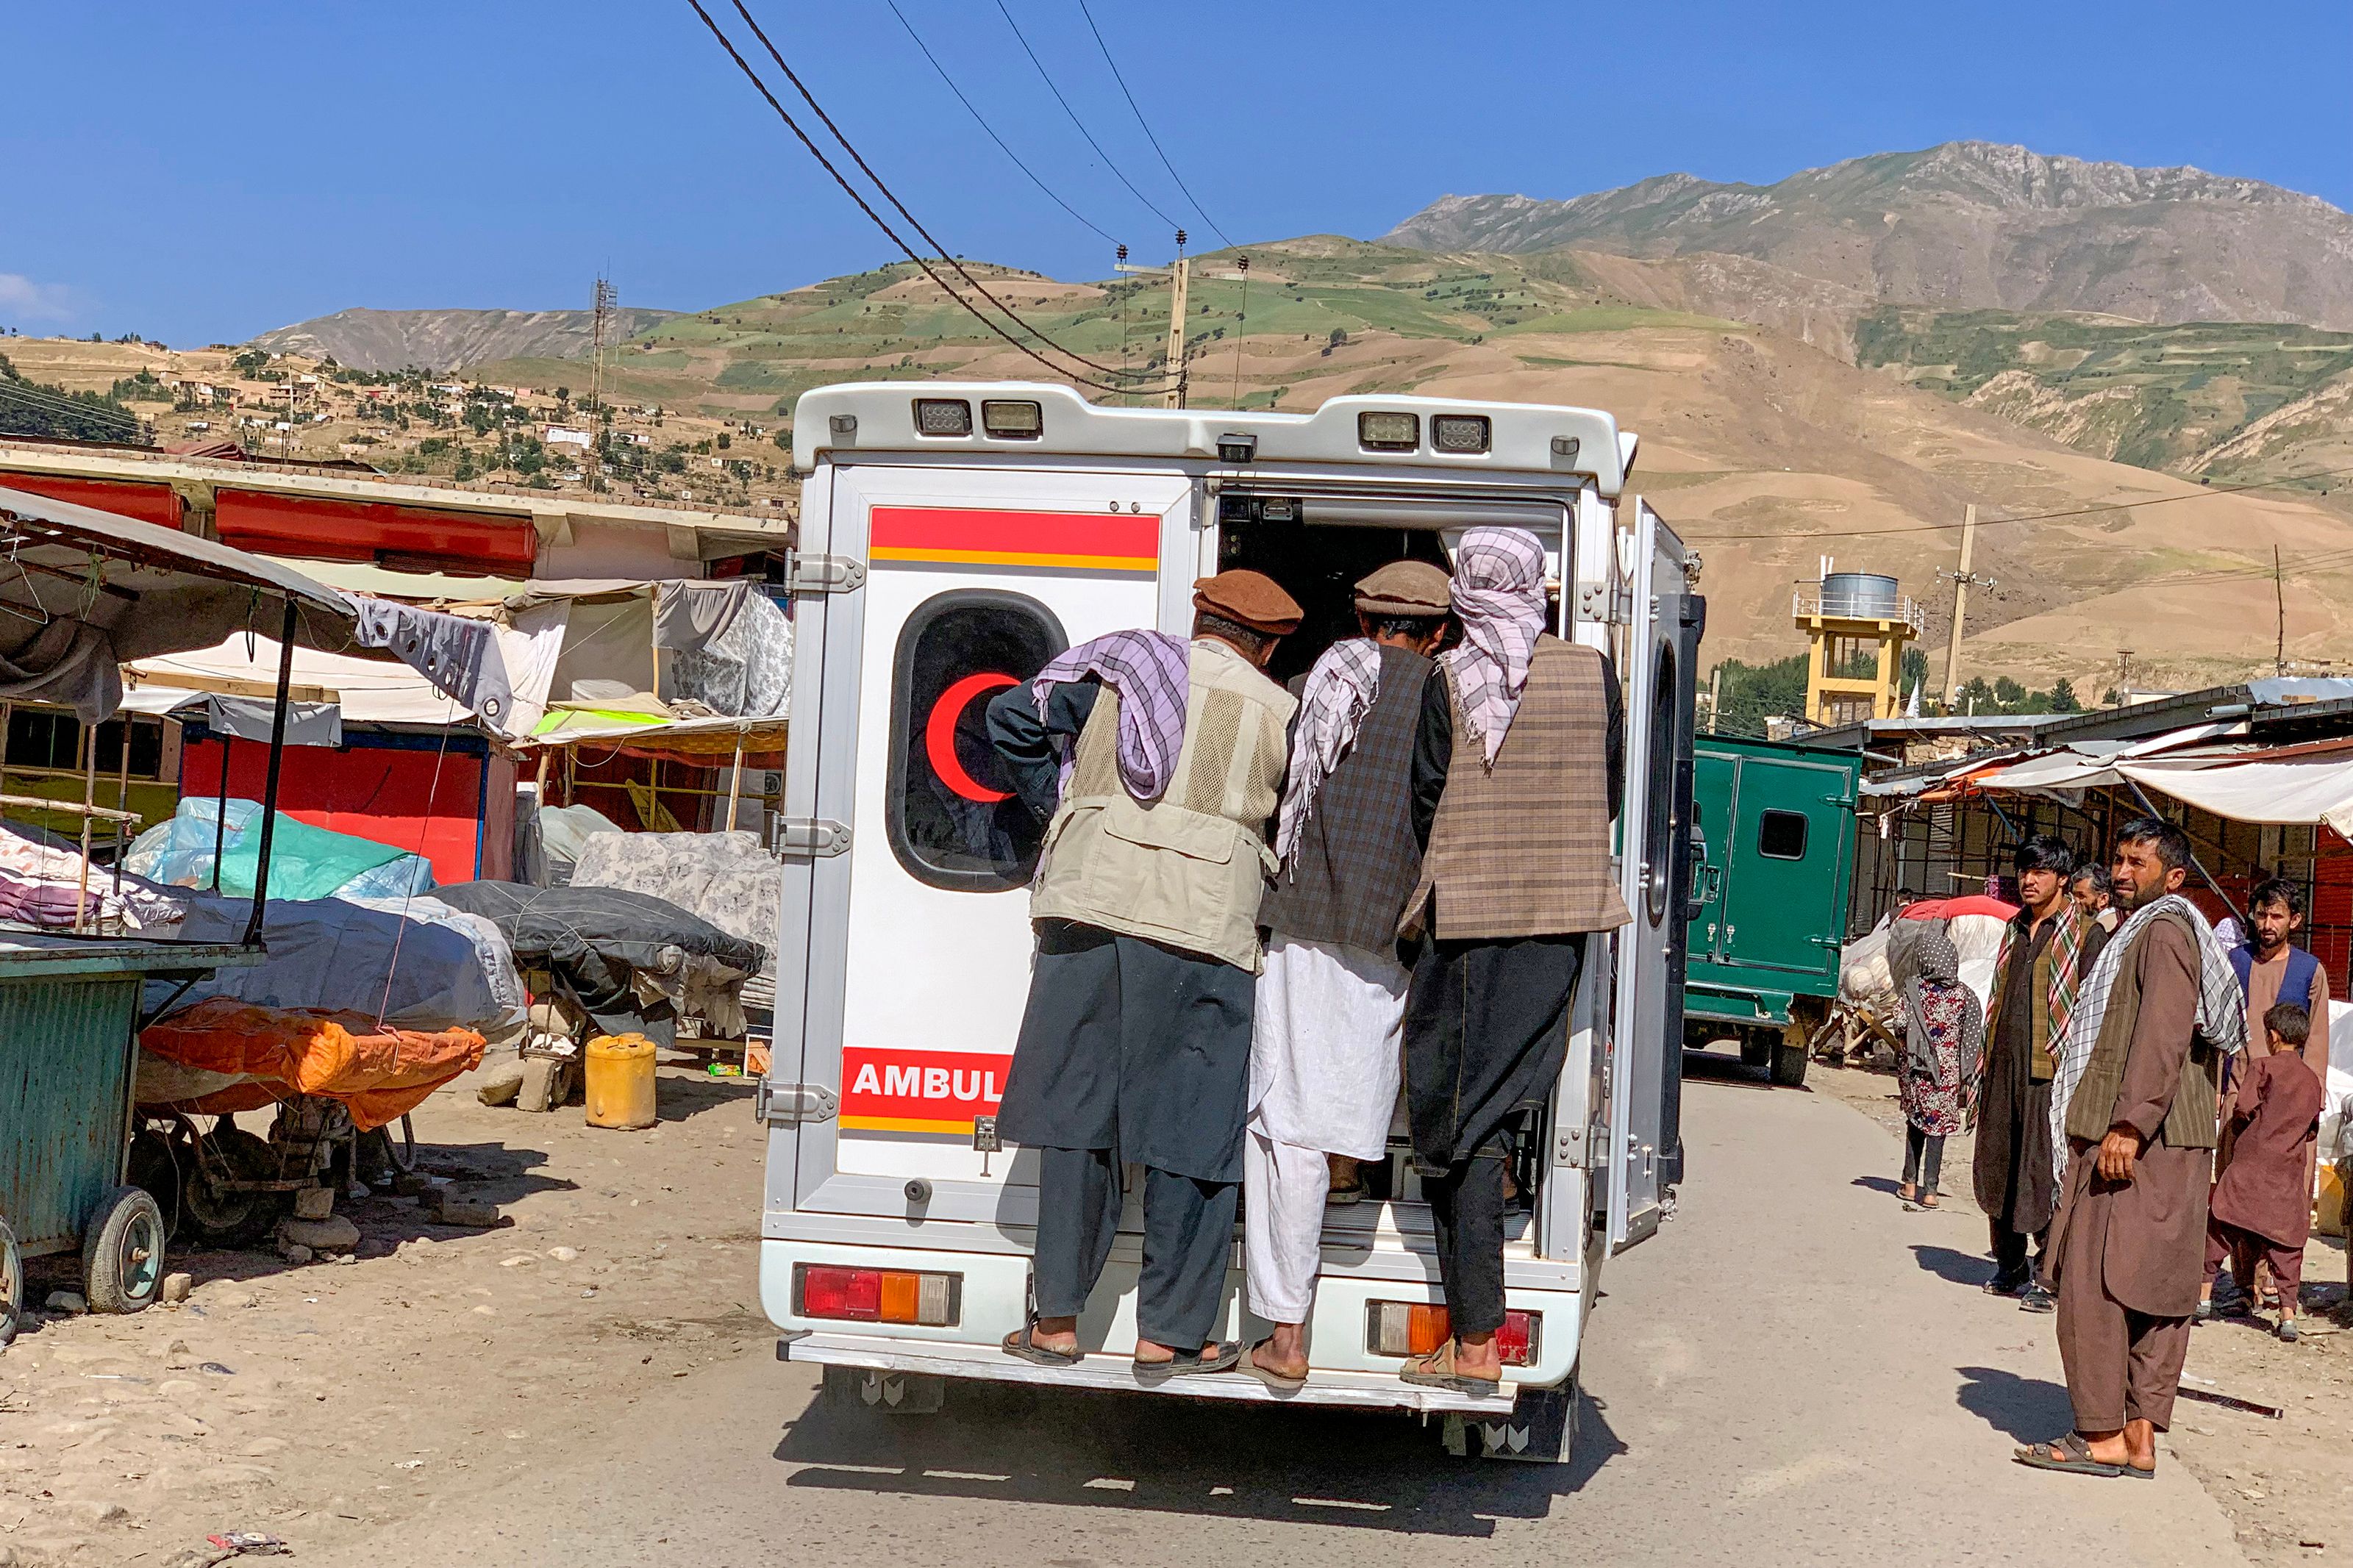 Relatives carry the bodies of slain victims in an ambulance after a bomb explosion during Fatiha prayers at the Nabawi mosque in the Hesa-e-Awal area of Fayzabad district, Badakhshan province